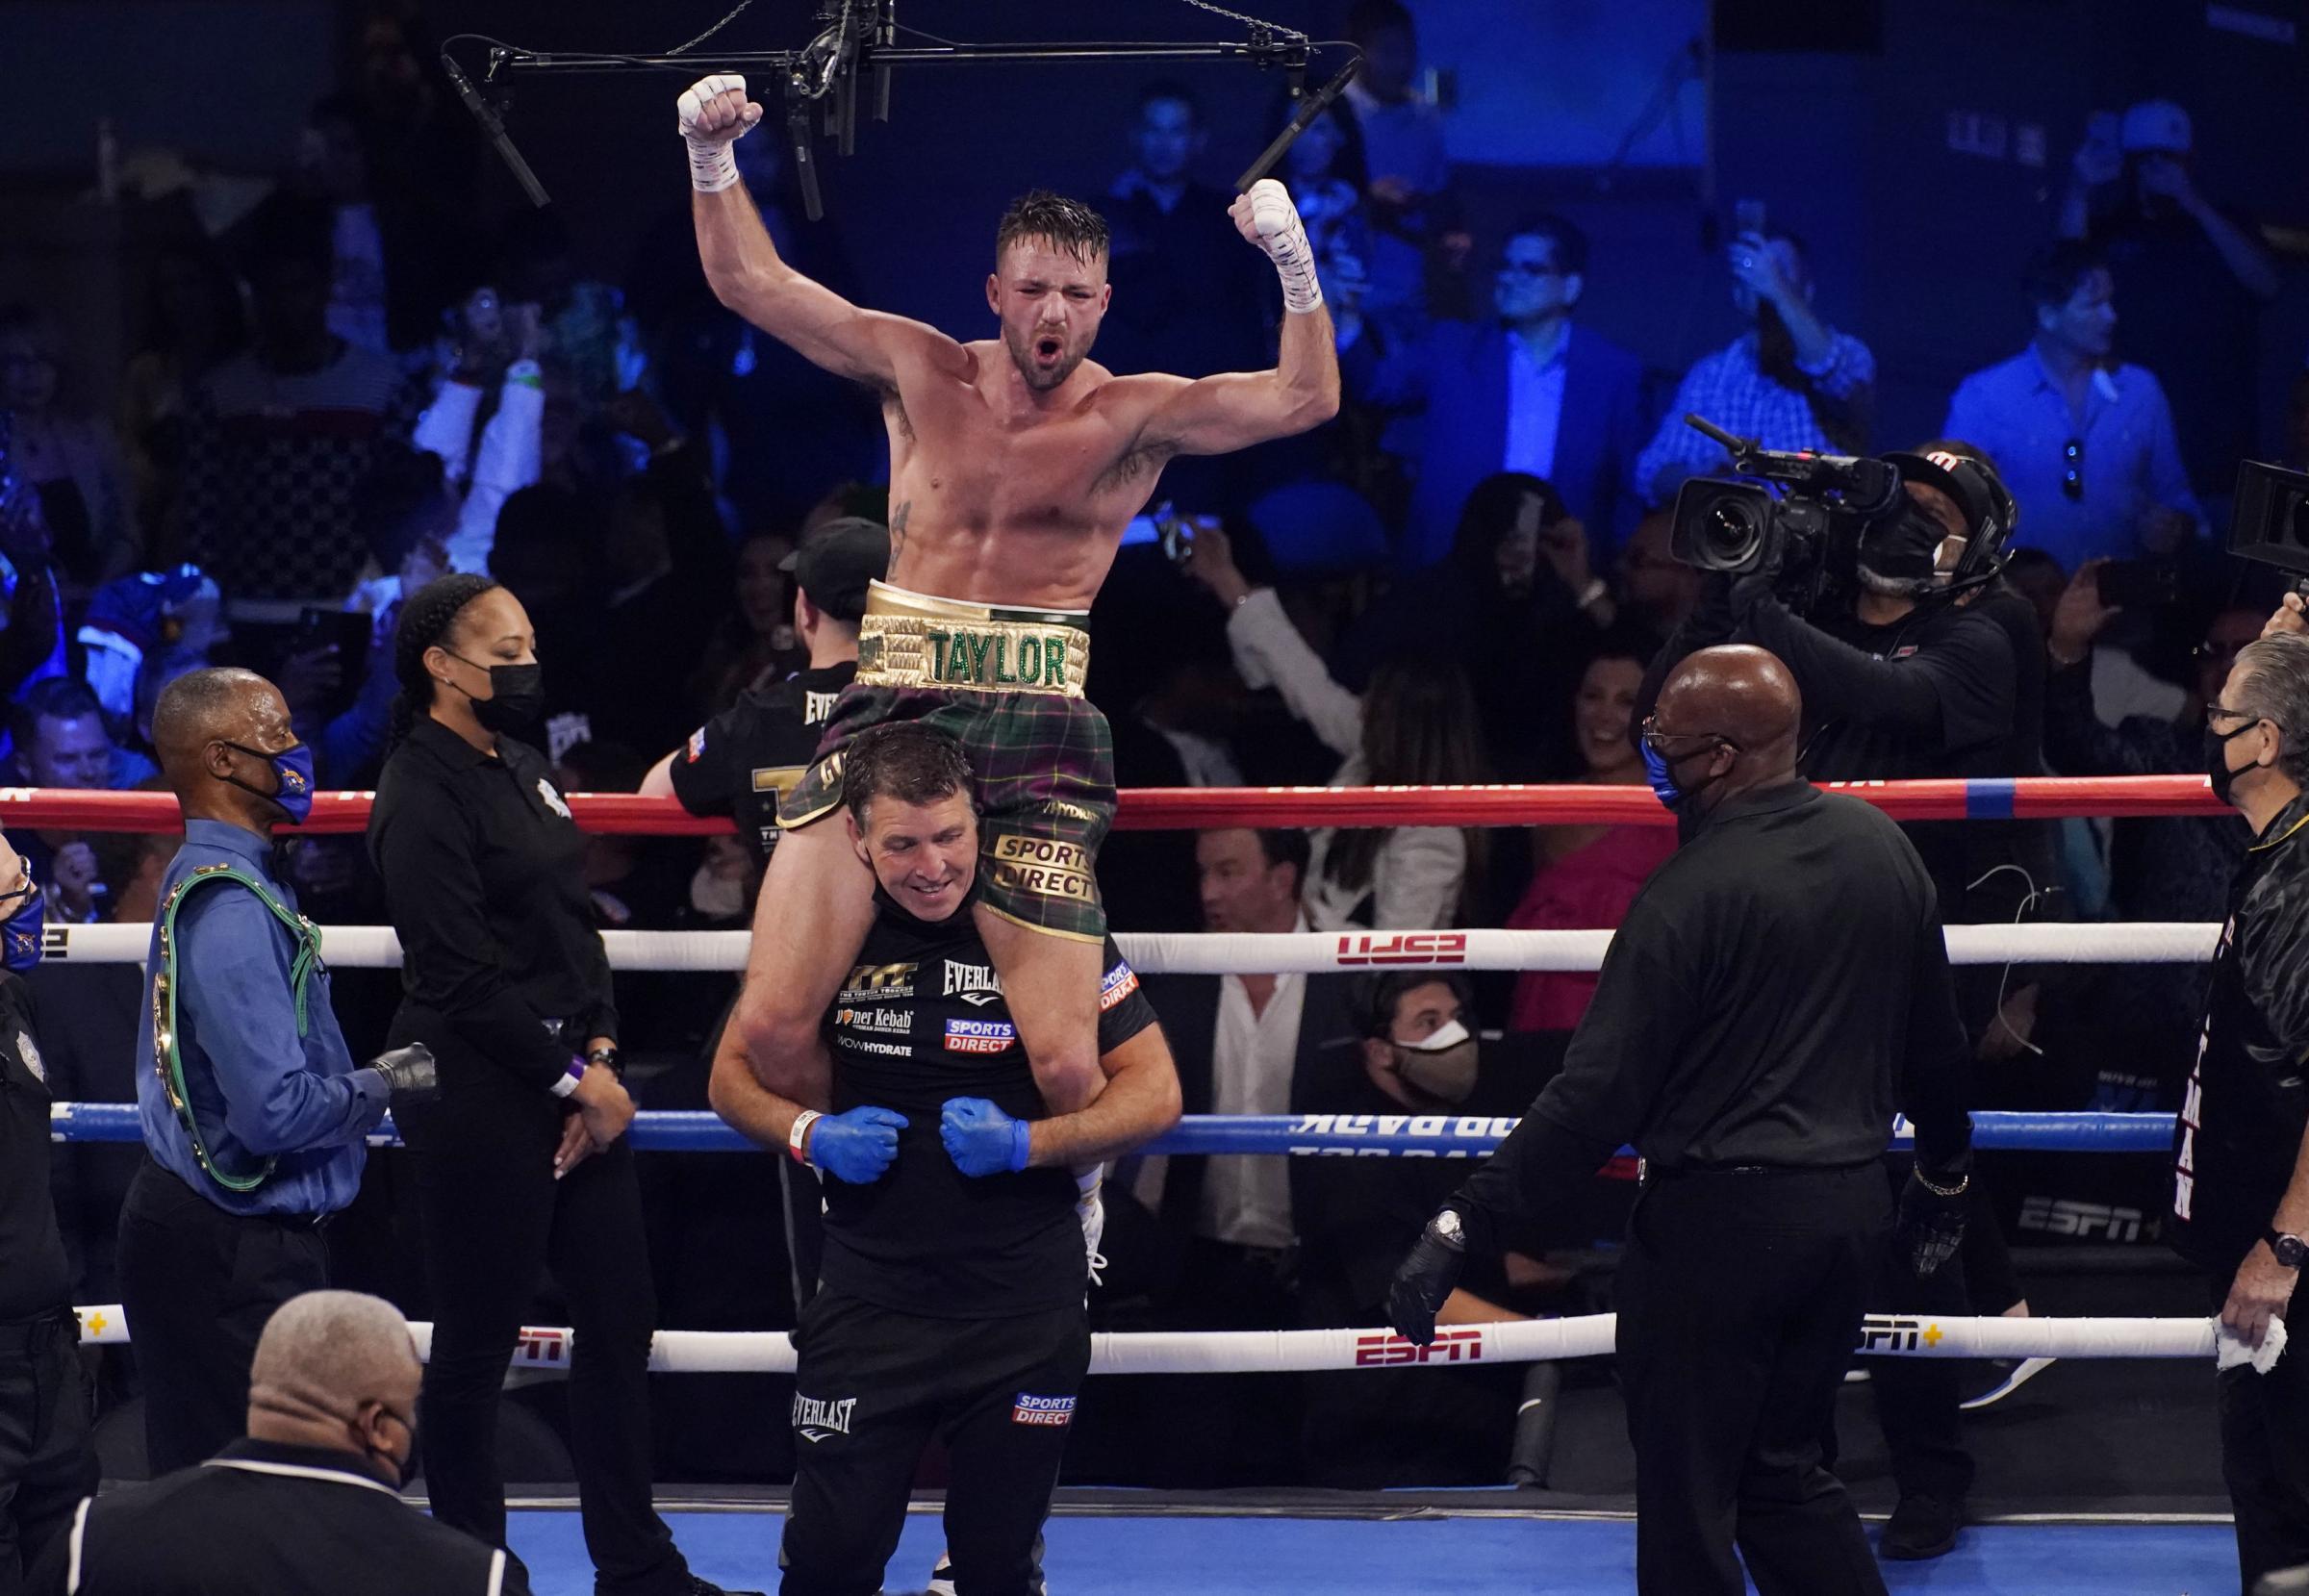 Josh Taylor celebrates after defeating Jose Ramirez by unanimous decision in a junior welterweight title boxing bout Saturday, May 22, 2021, in Las Vegas. (AP Photo/John Locher).